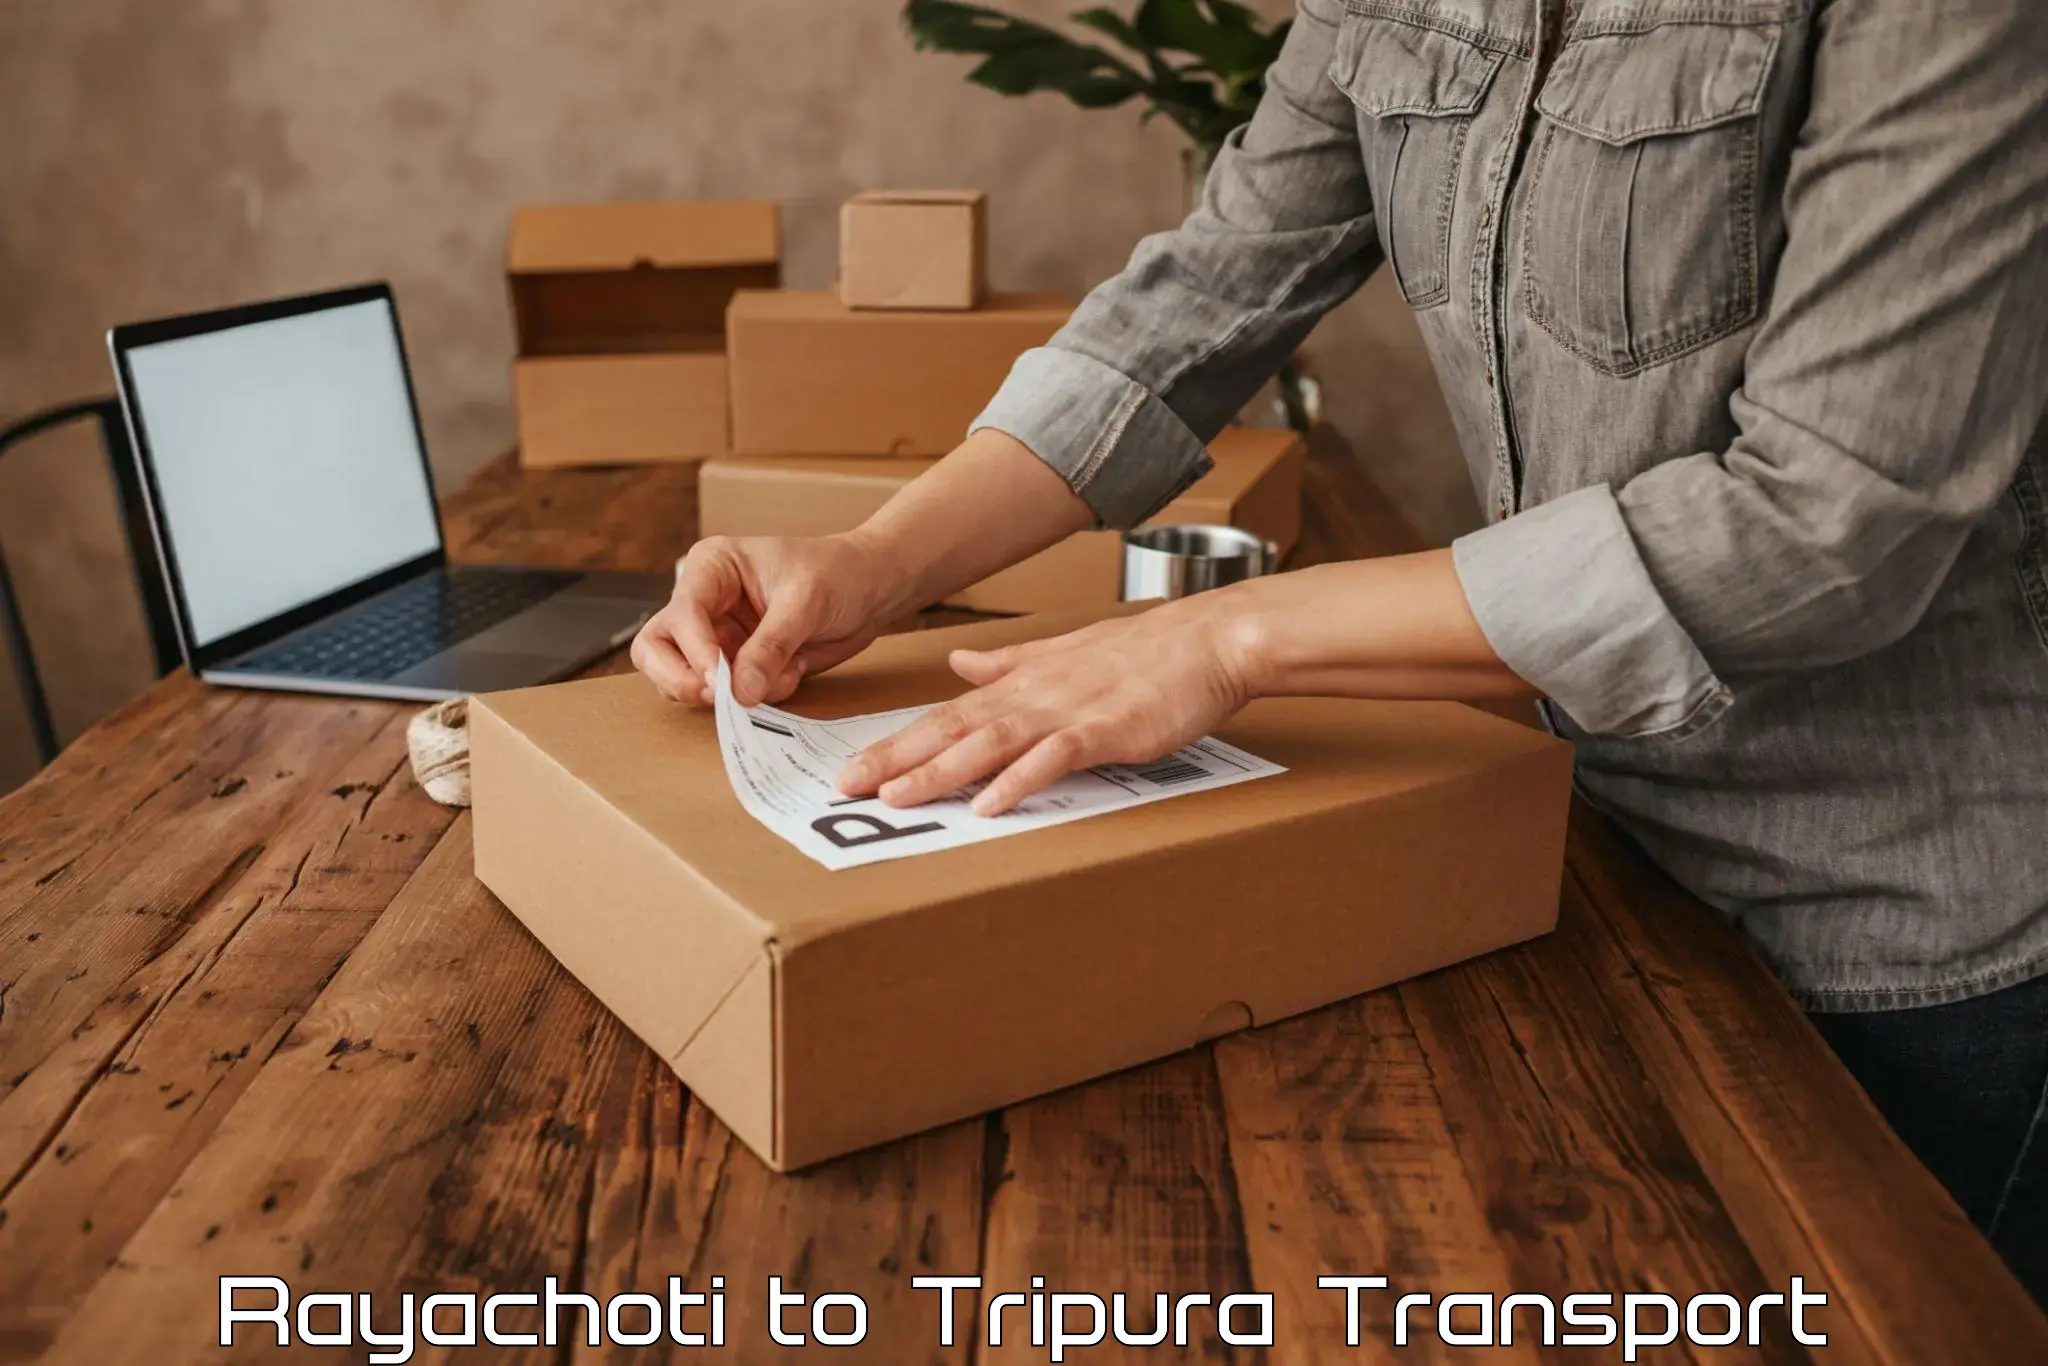 Commercial transport service Rayachoti to South Tripura